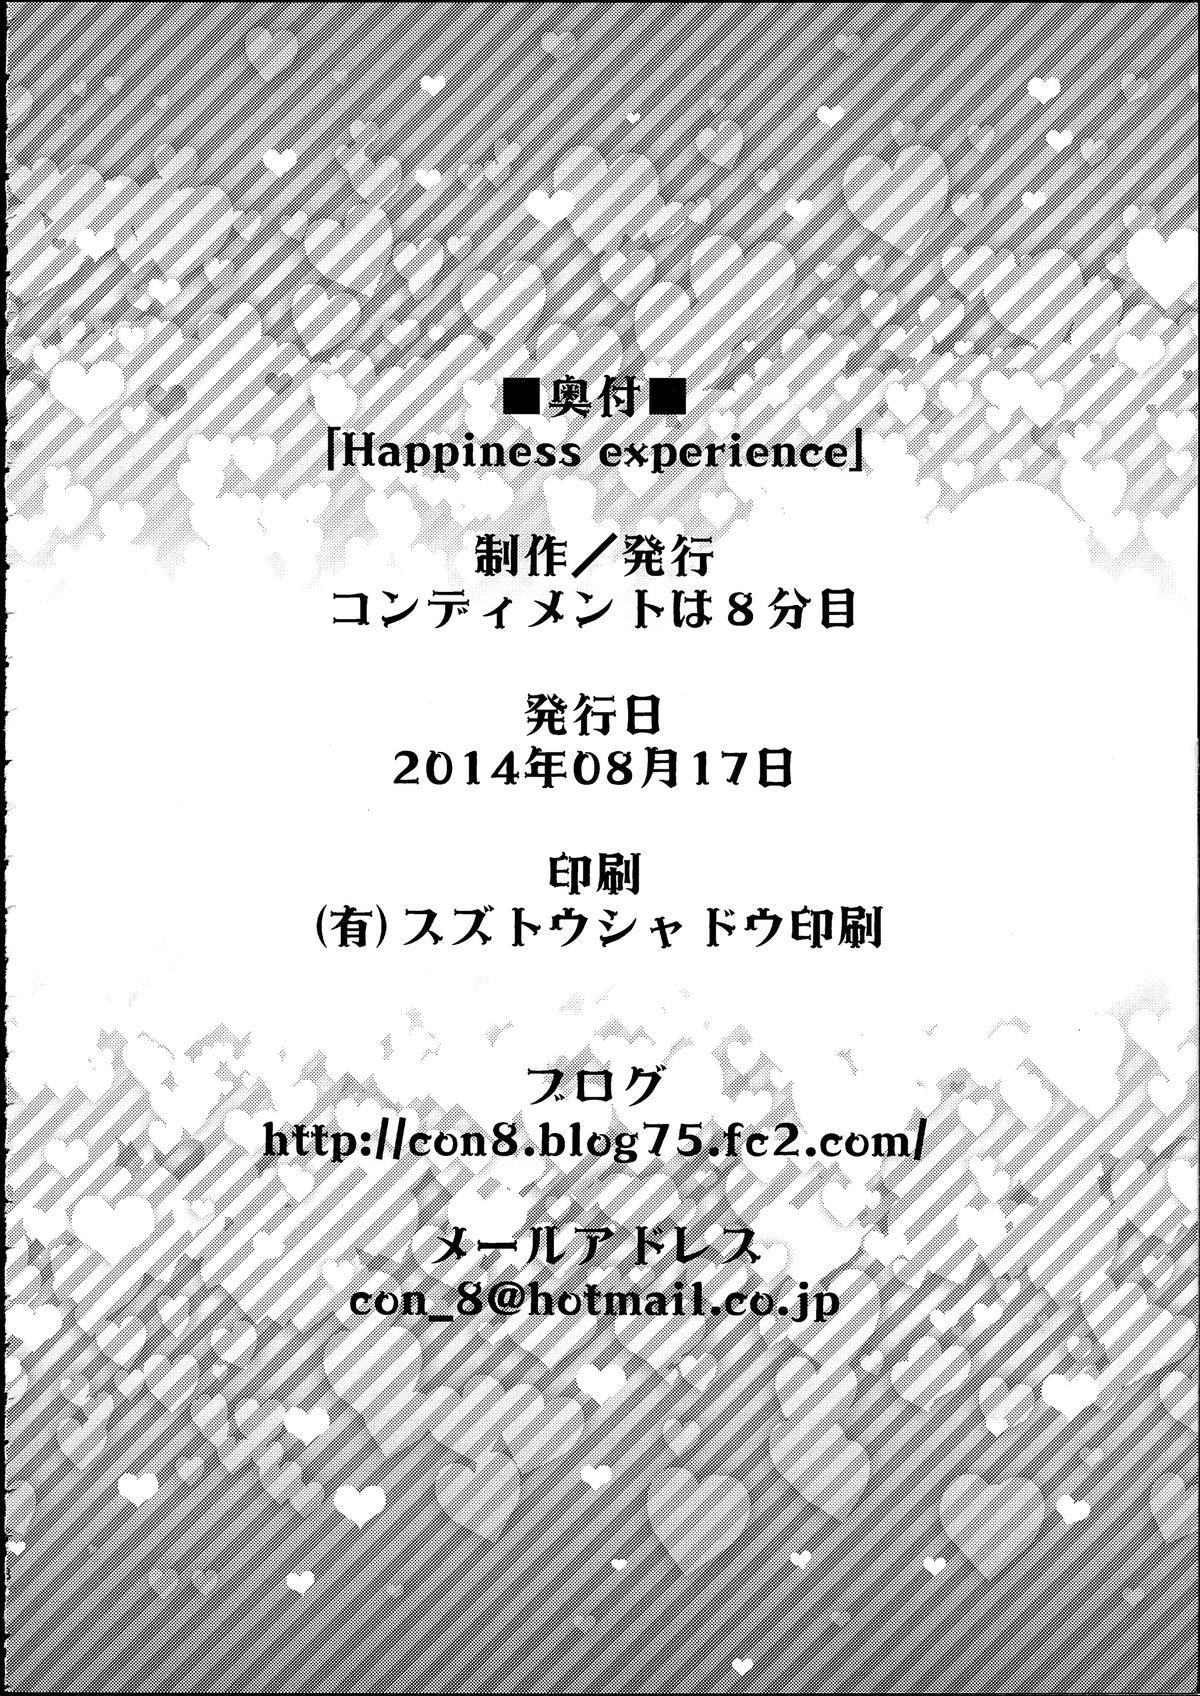 Happiness experience 37